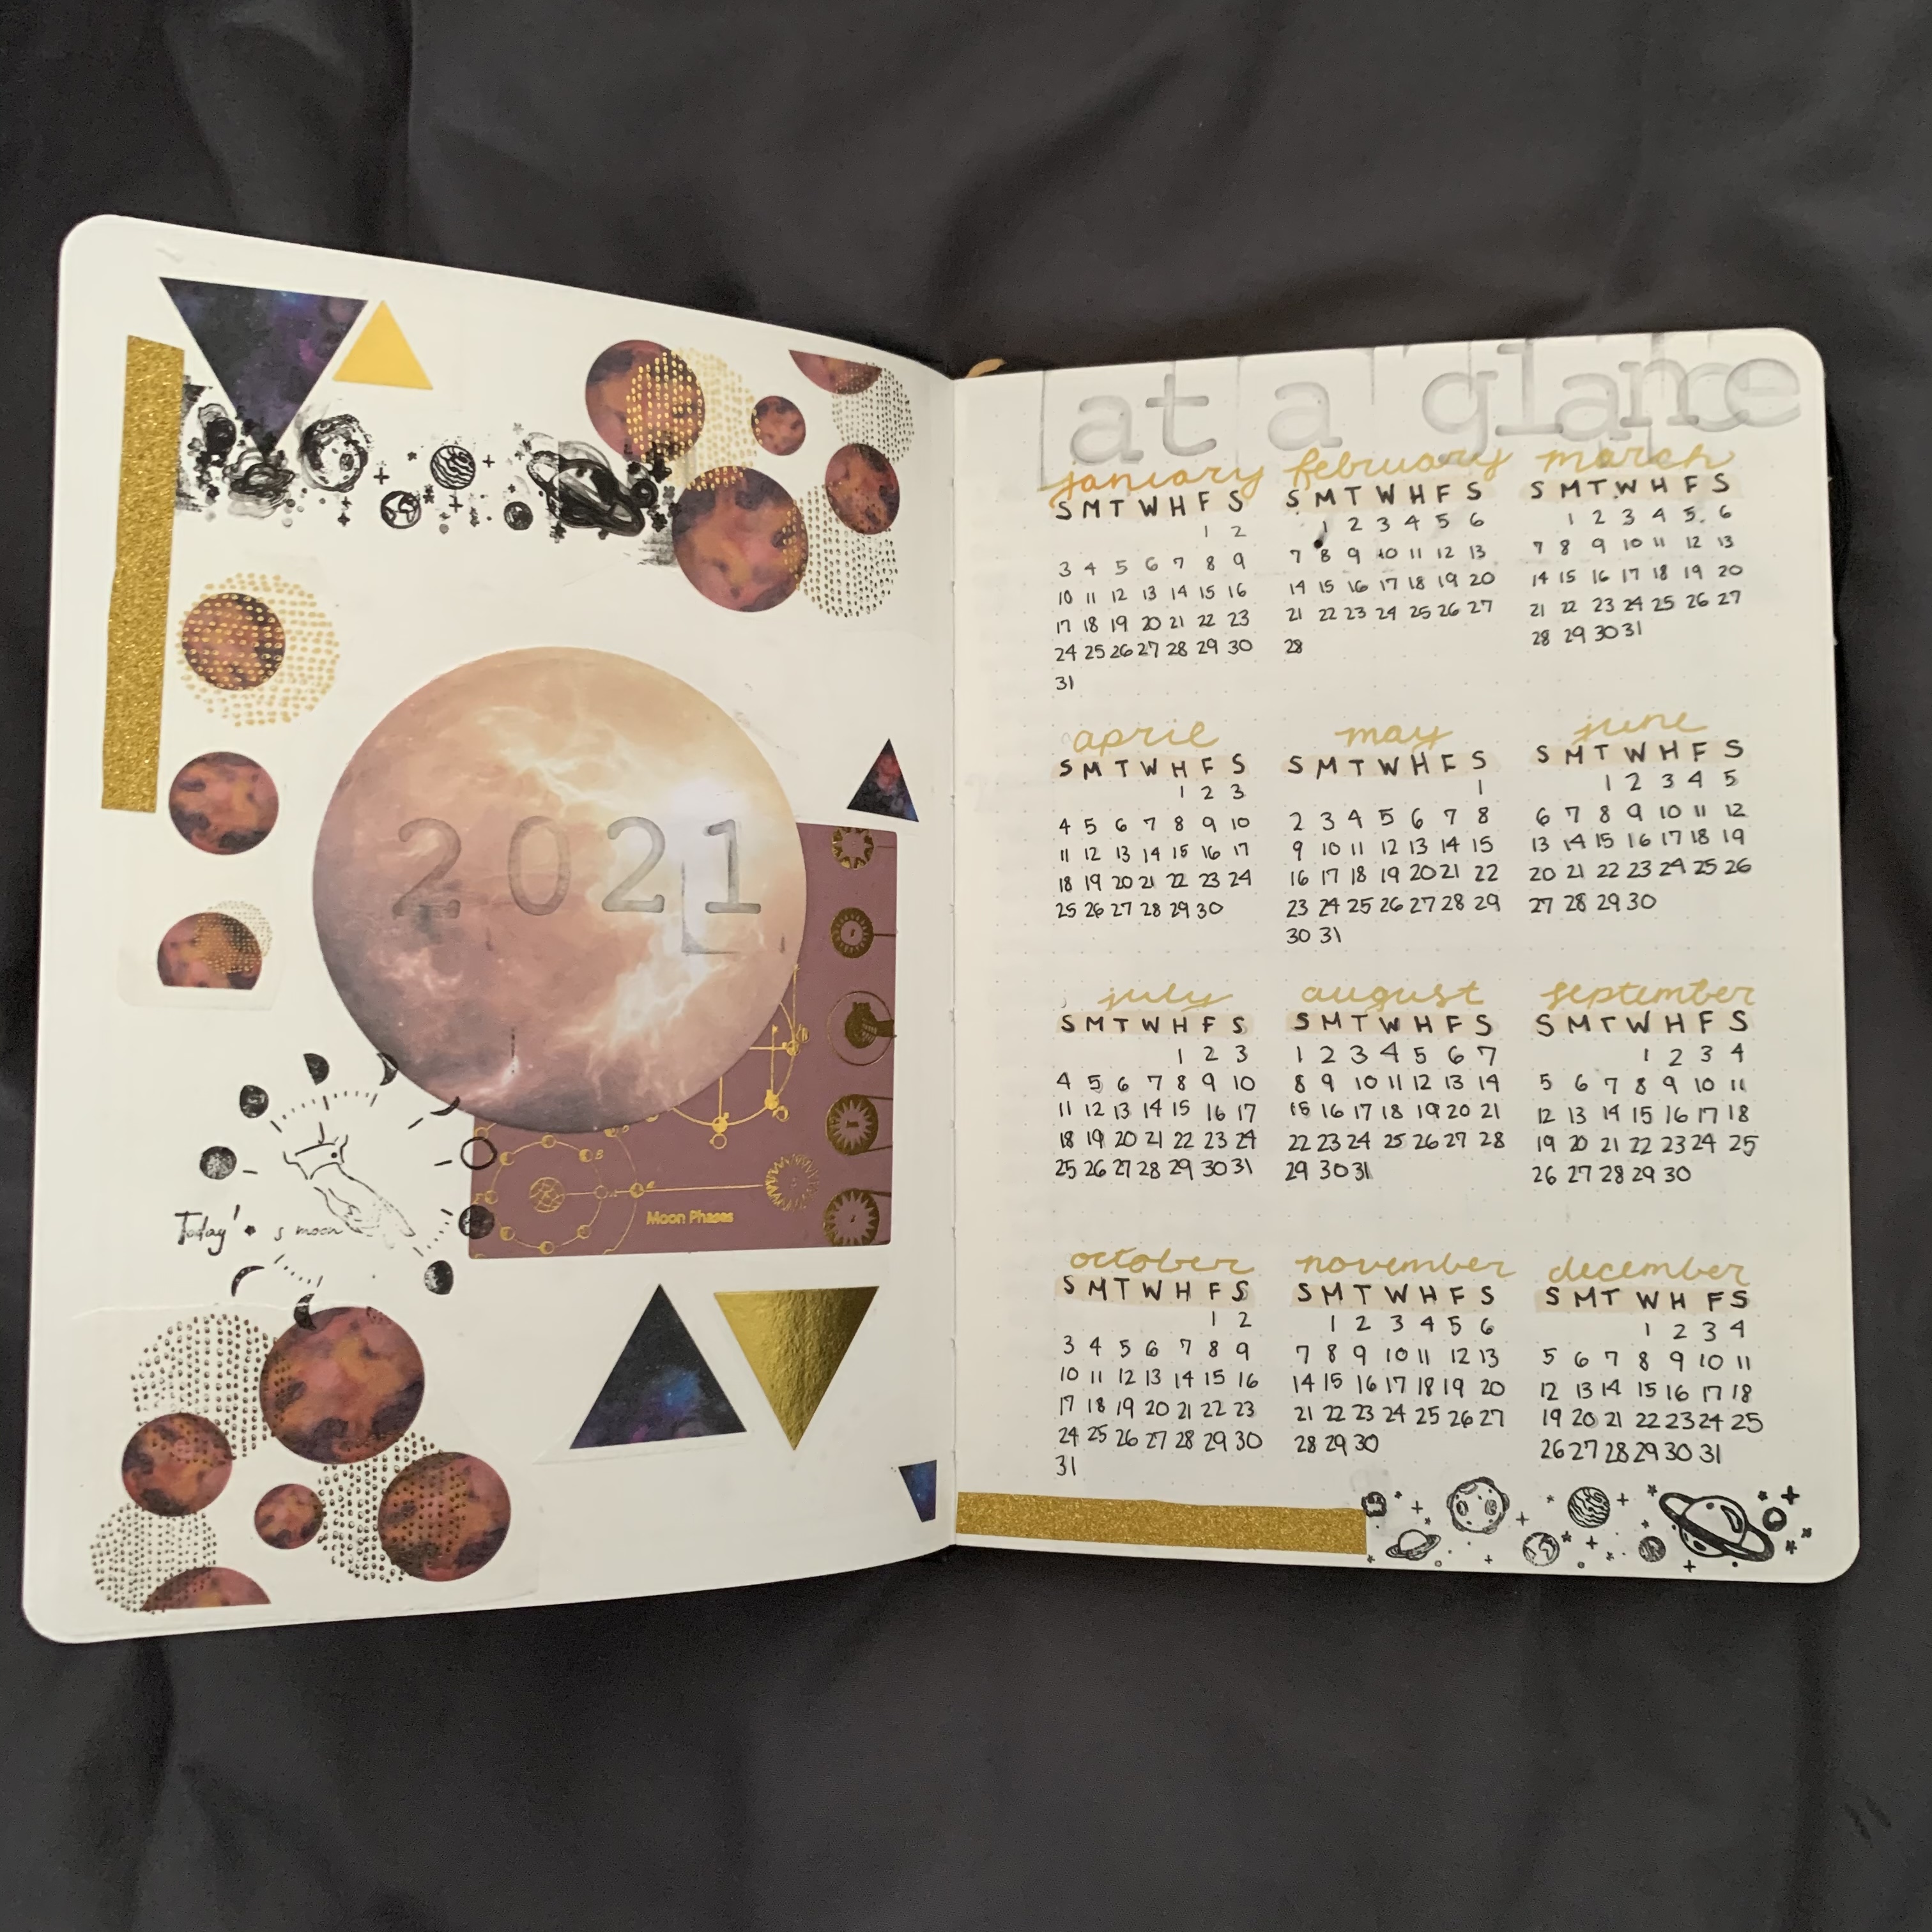 2021 Bullet Journal - Title Page and At-A-Glance